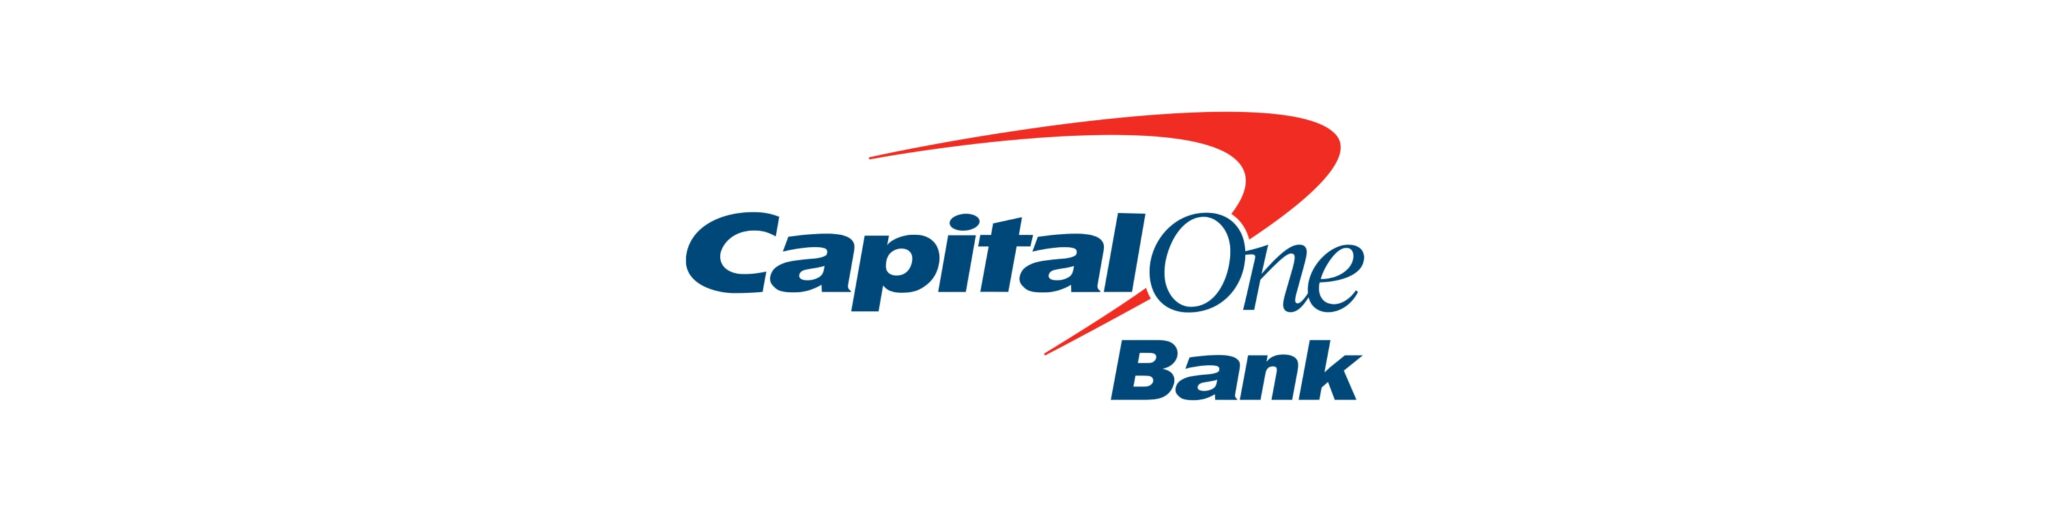 Capital One (Bank) in the top 8 Big Data solutions